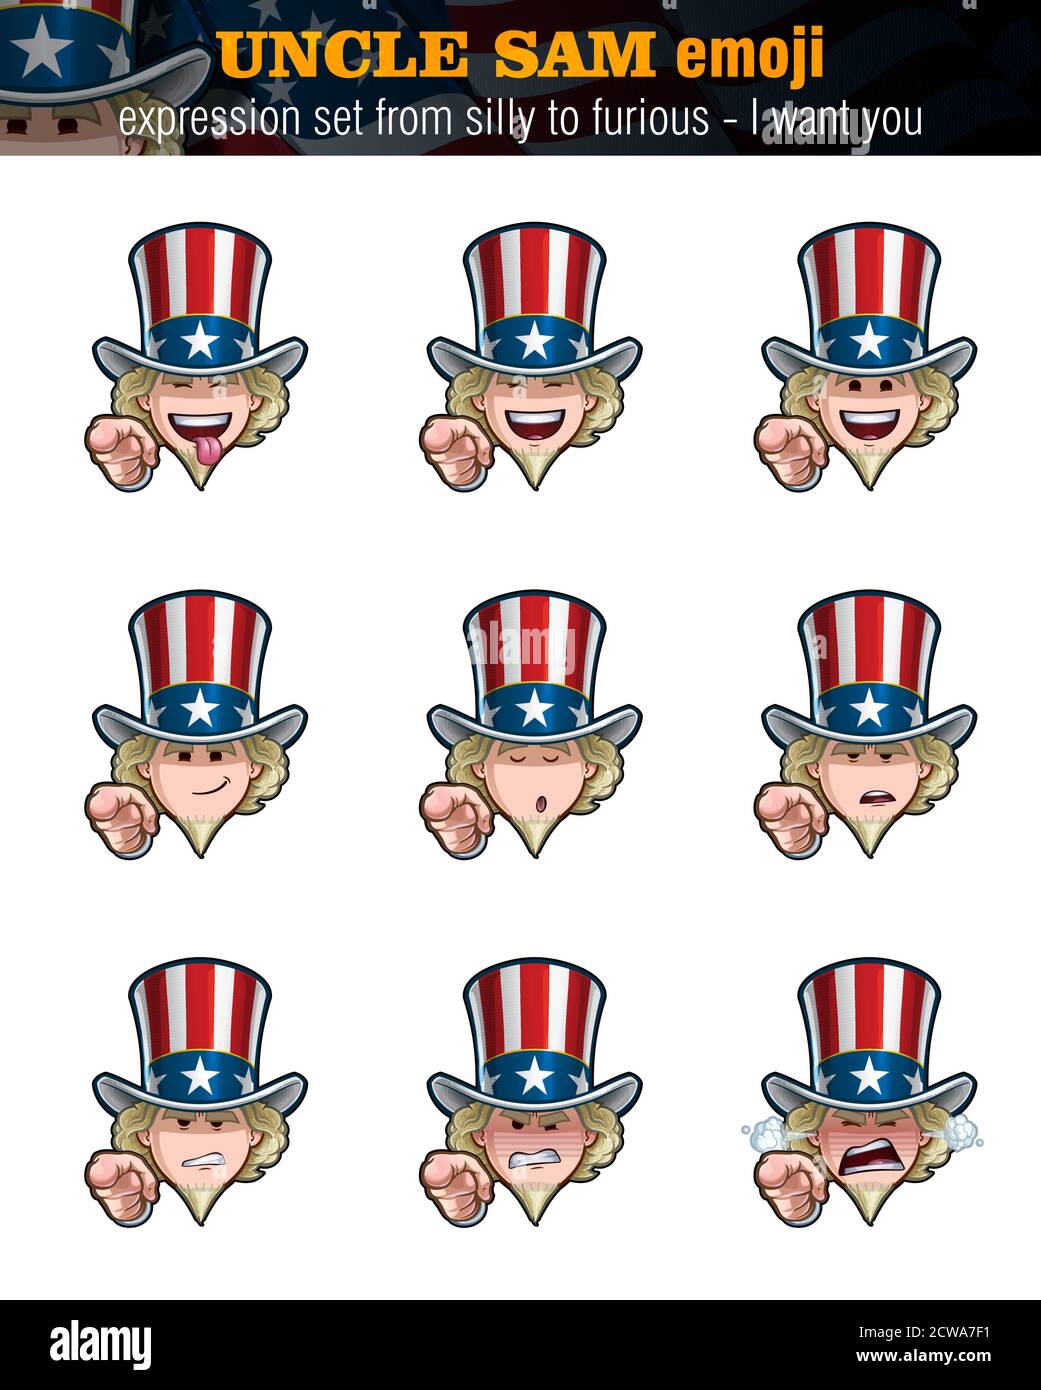 Vector illustrations Set cartoon Uncle Sam Emoji - I want you. Nine expressions, silly, laughing, happy, smiling, preaching, serous, unamused, angry n Stock Vector